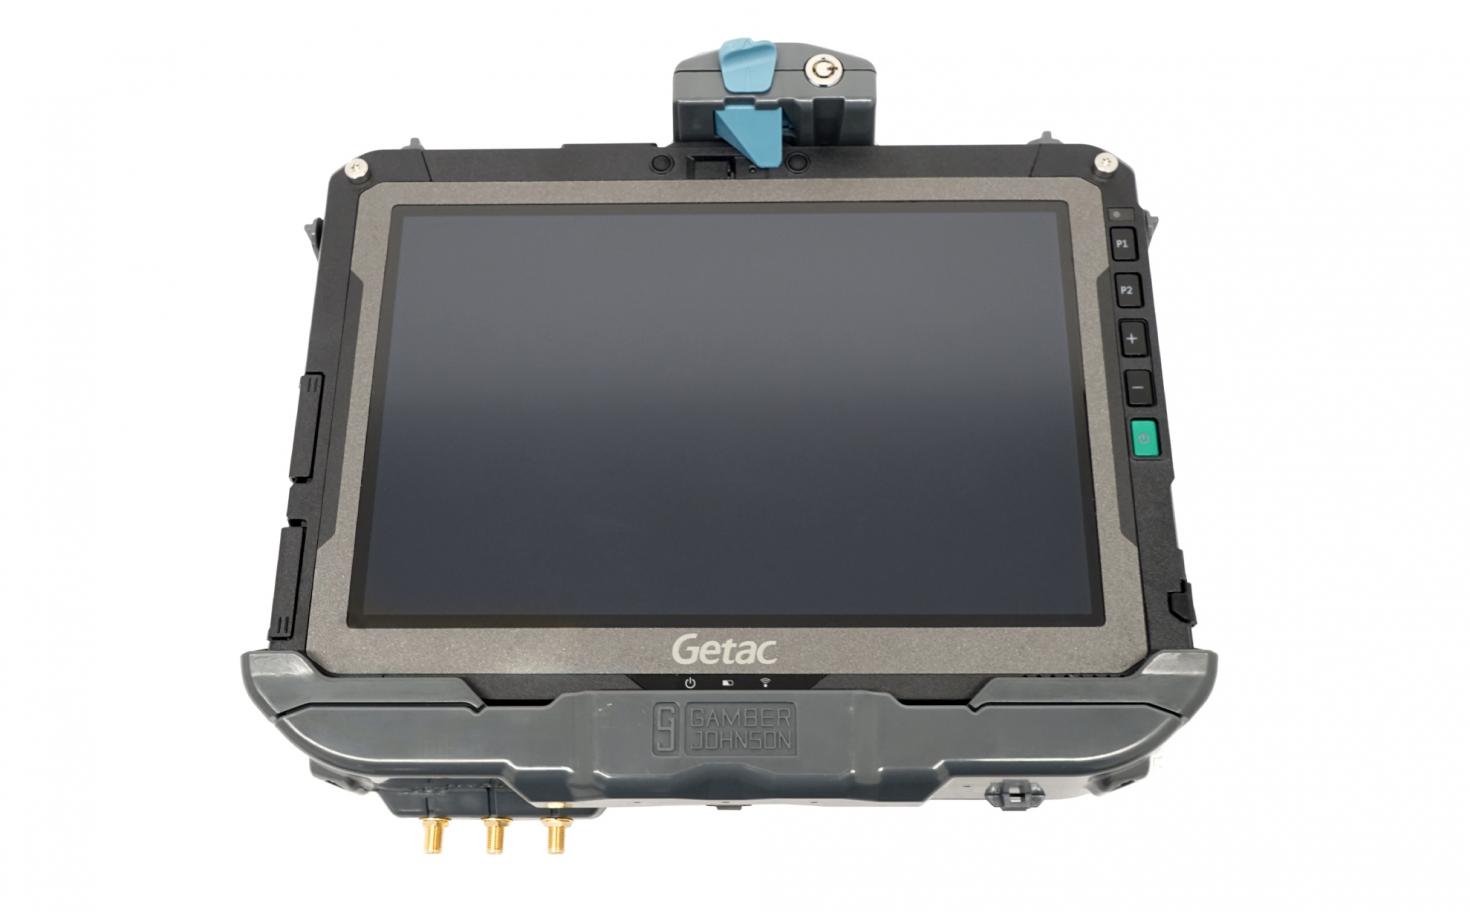 Getac ZX10 docking station - front view with tablet